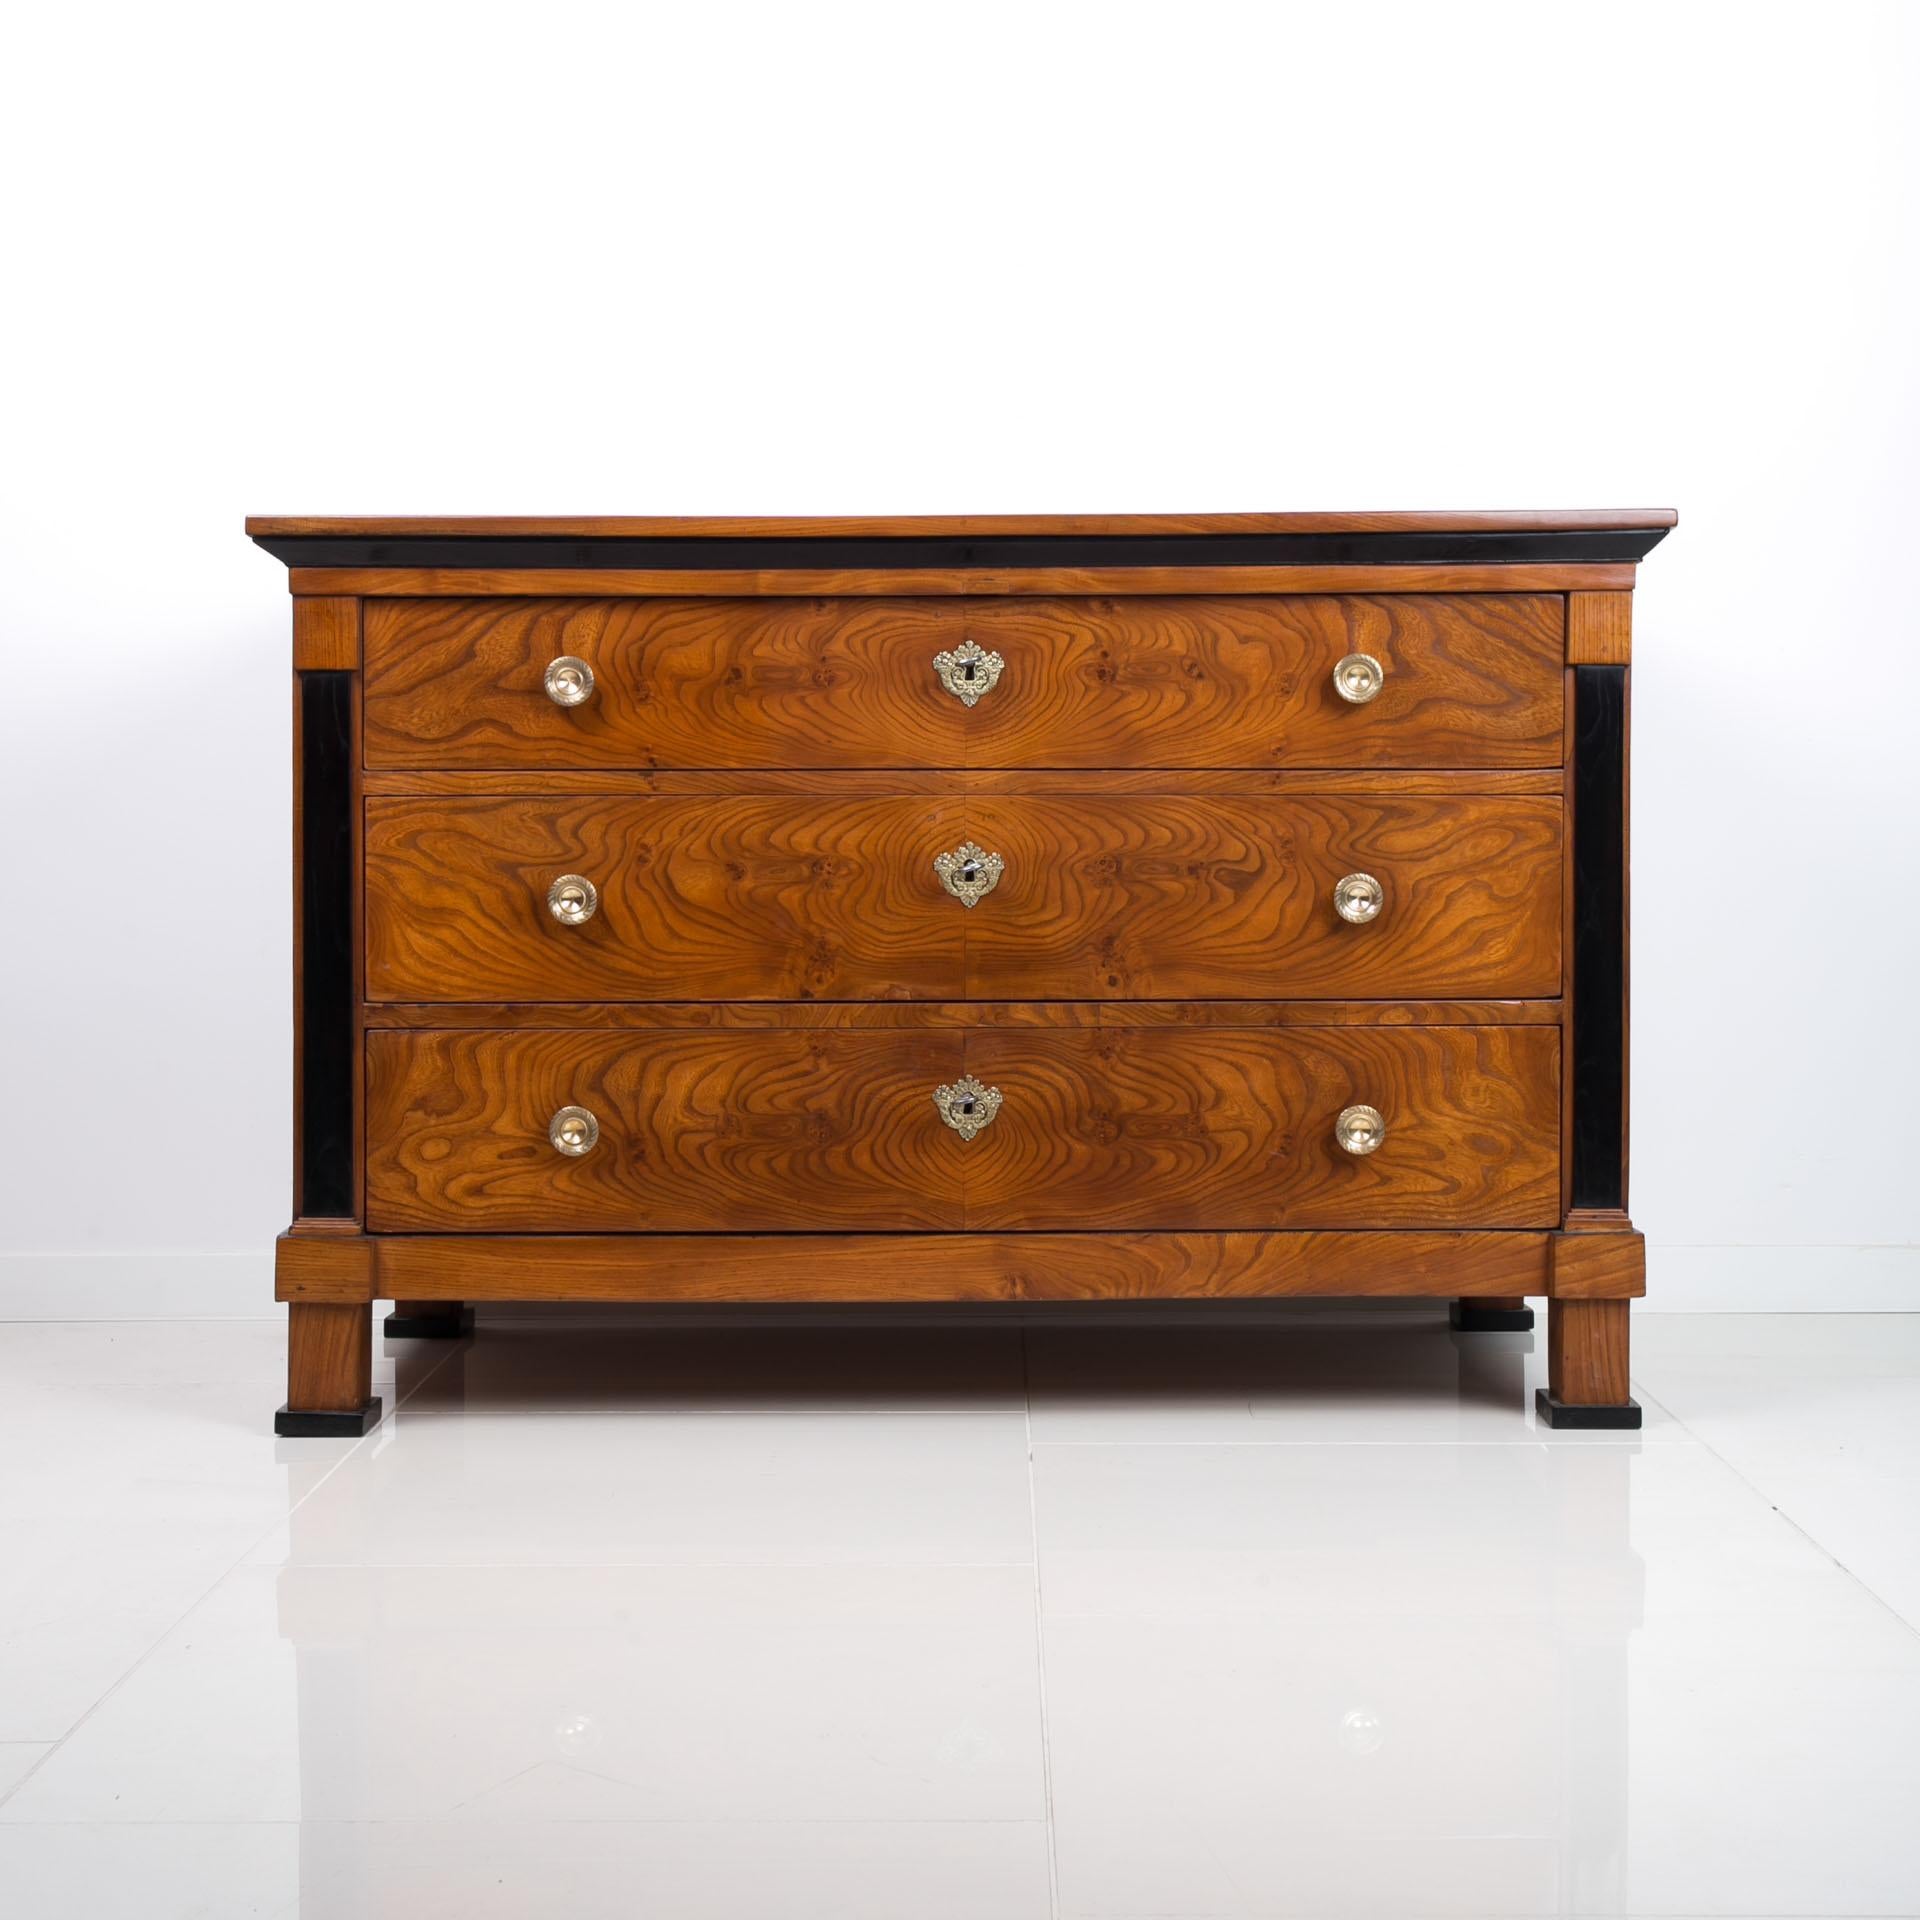 Biedermeier chest of drawers from first half of 19th century. This piece of furniture comes from France. It is veneered with beautiful elm wood veneer. It has undergone a careful renovation process in our workshop, during which the structure was